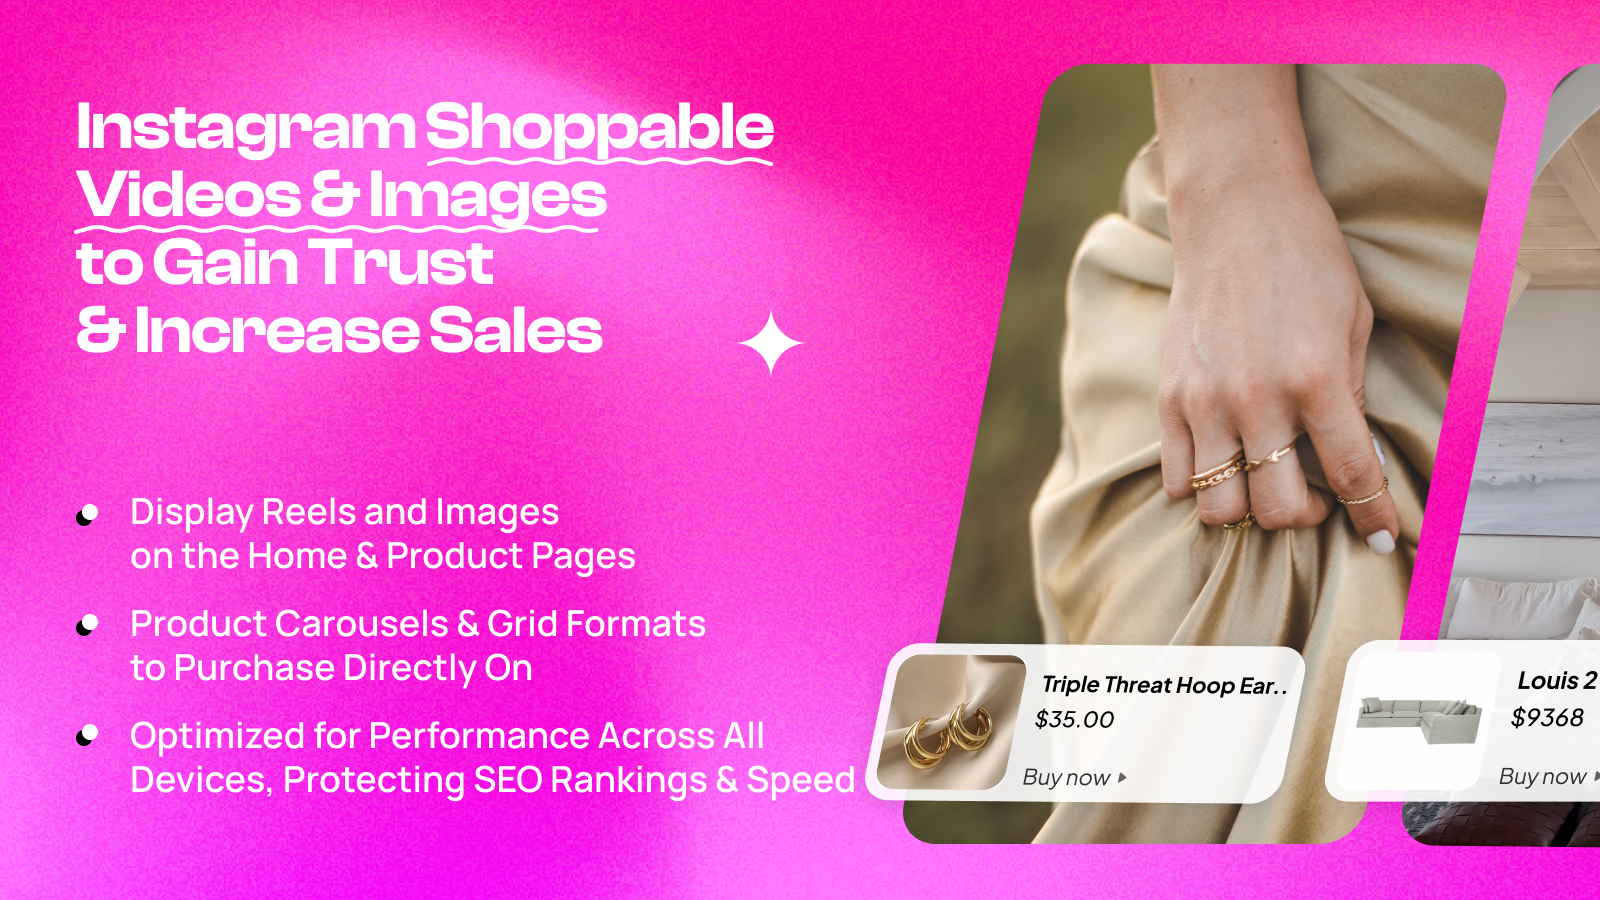 Storista - Shoppable Videos and Images